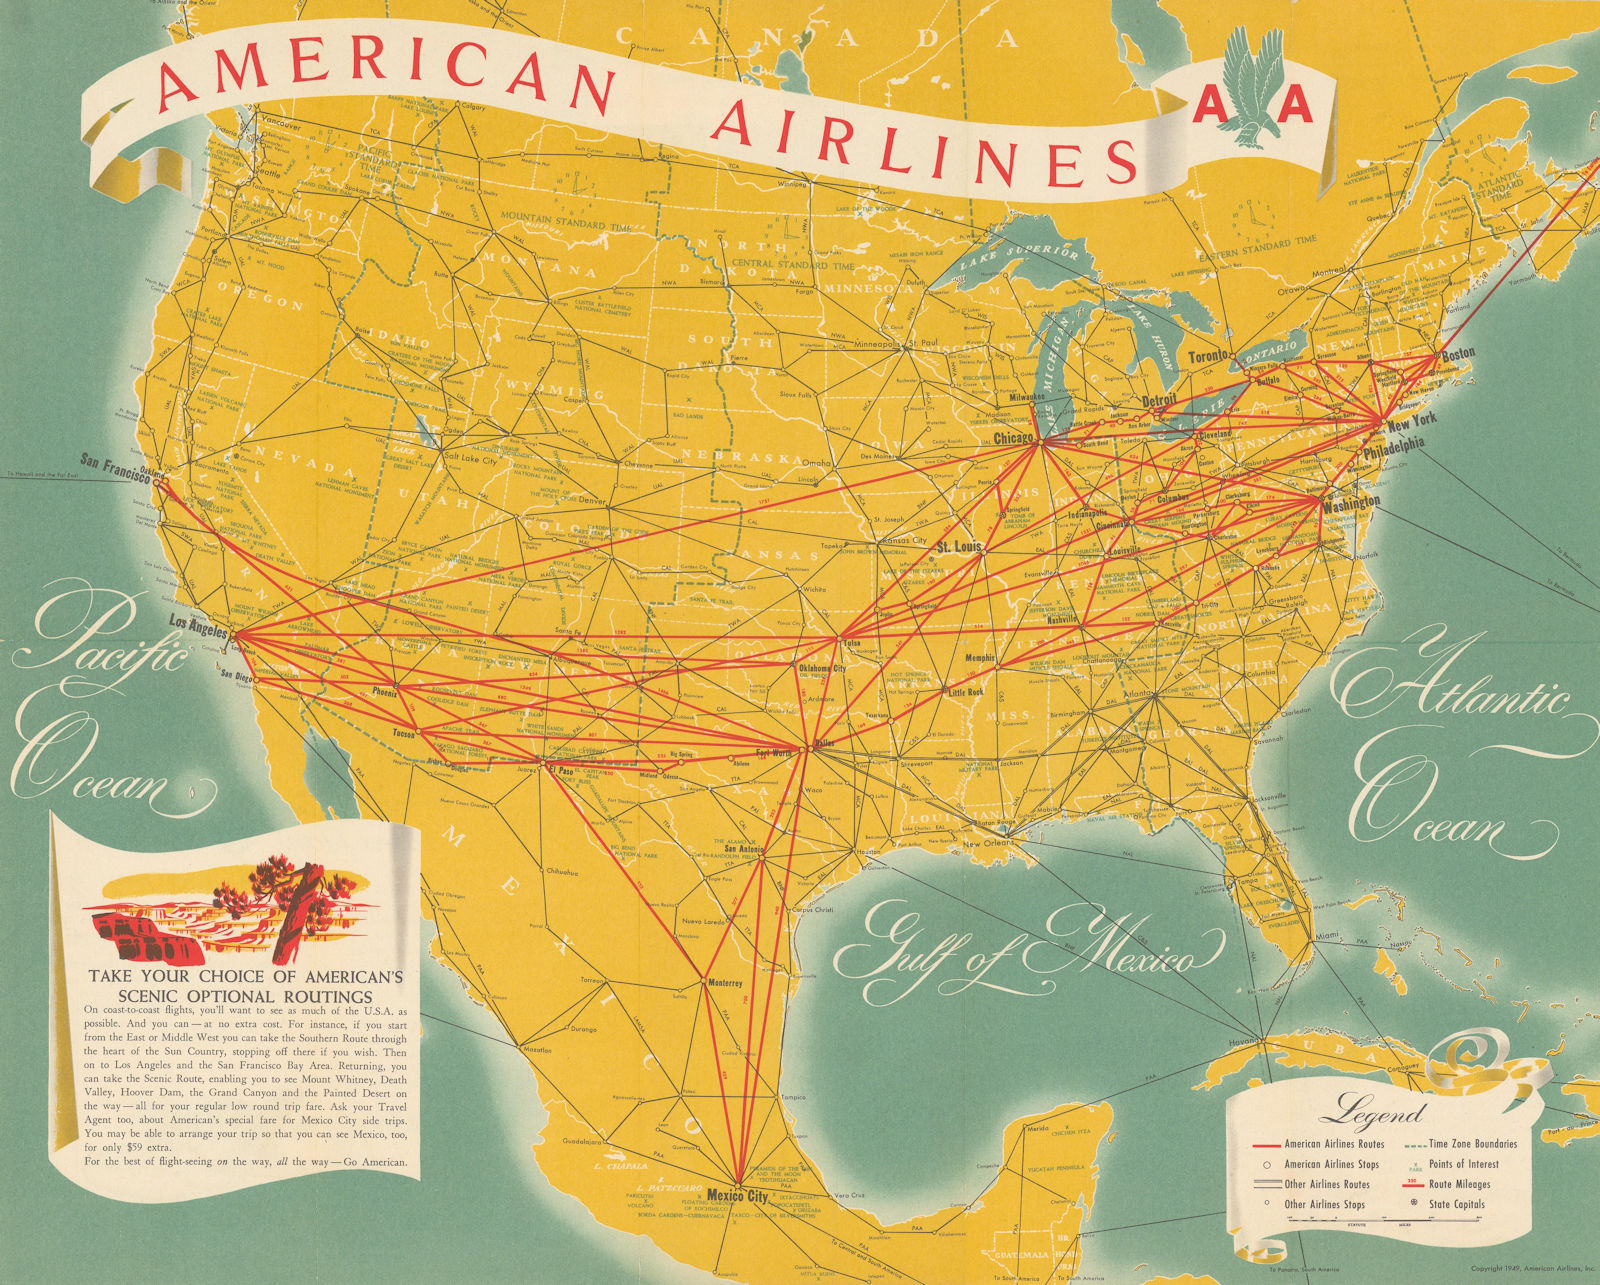 American Airlines system network route map. 16"x20" 1949 old vintage chart